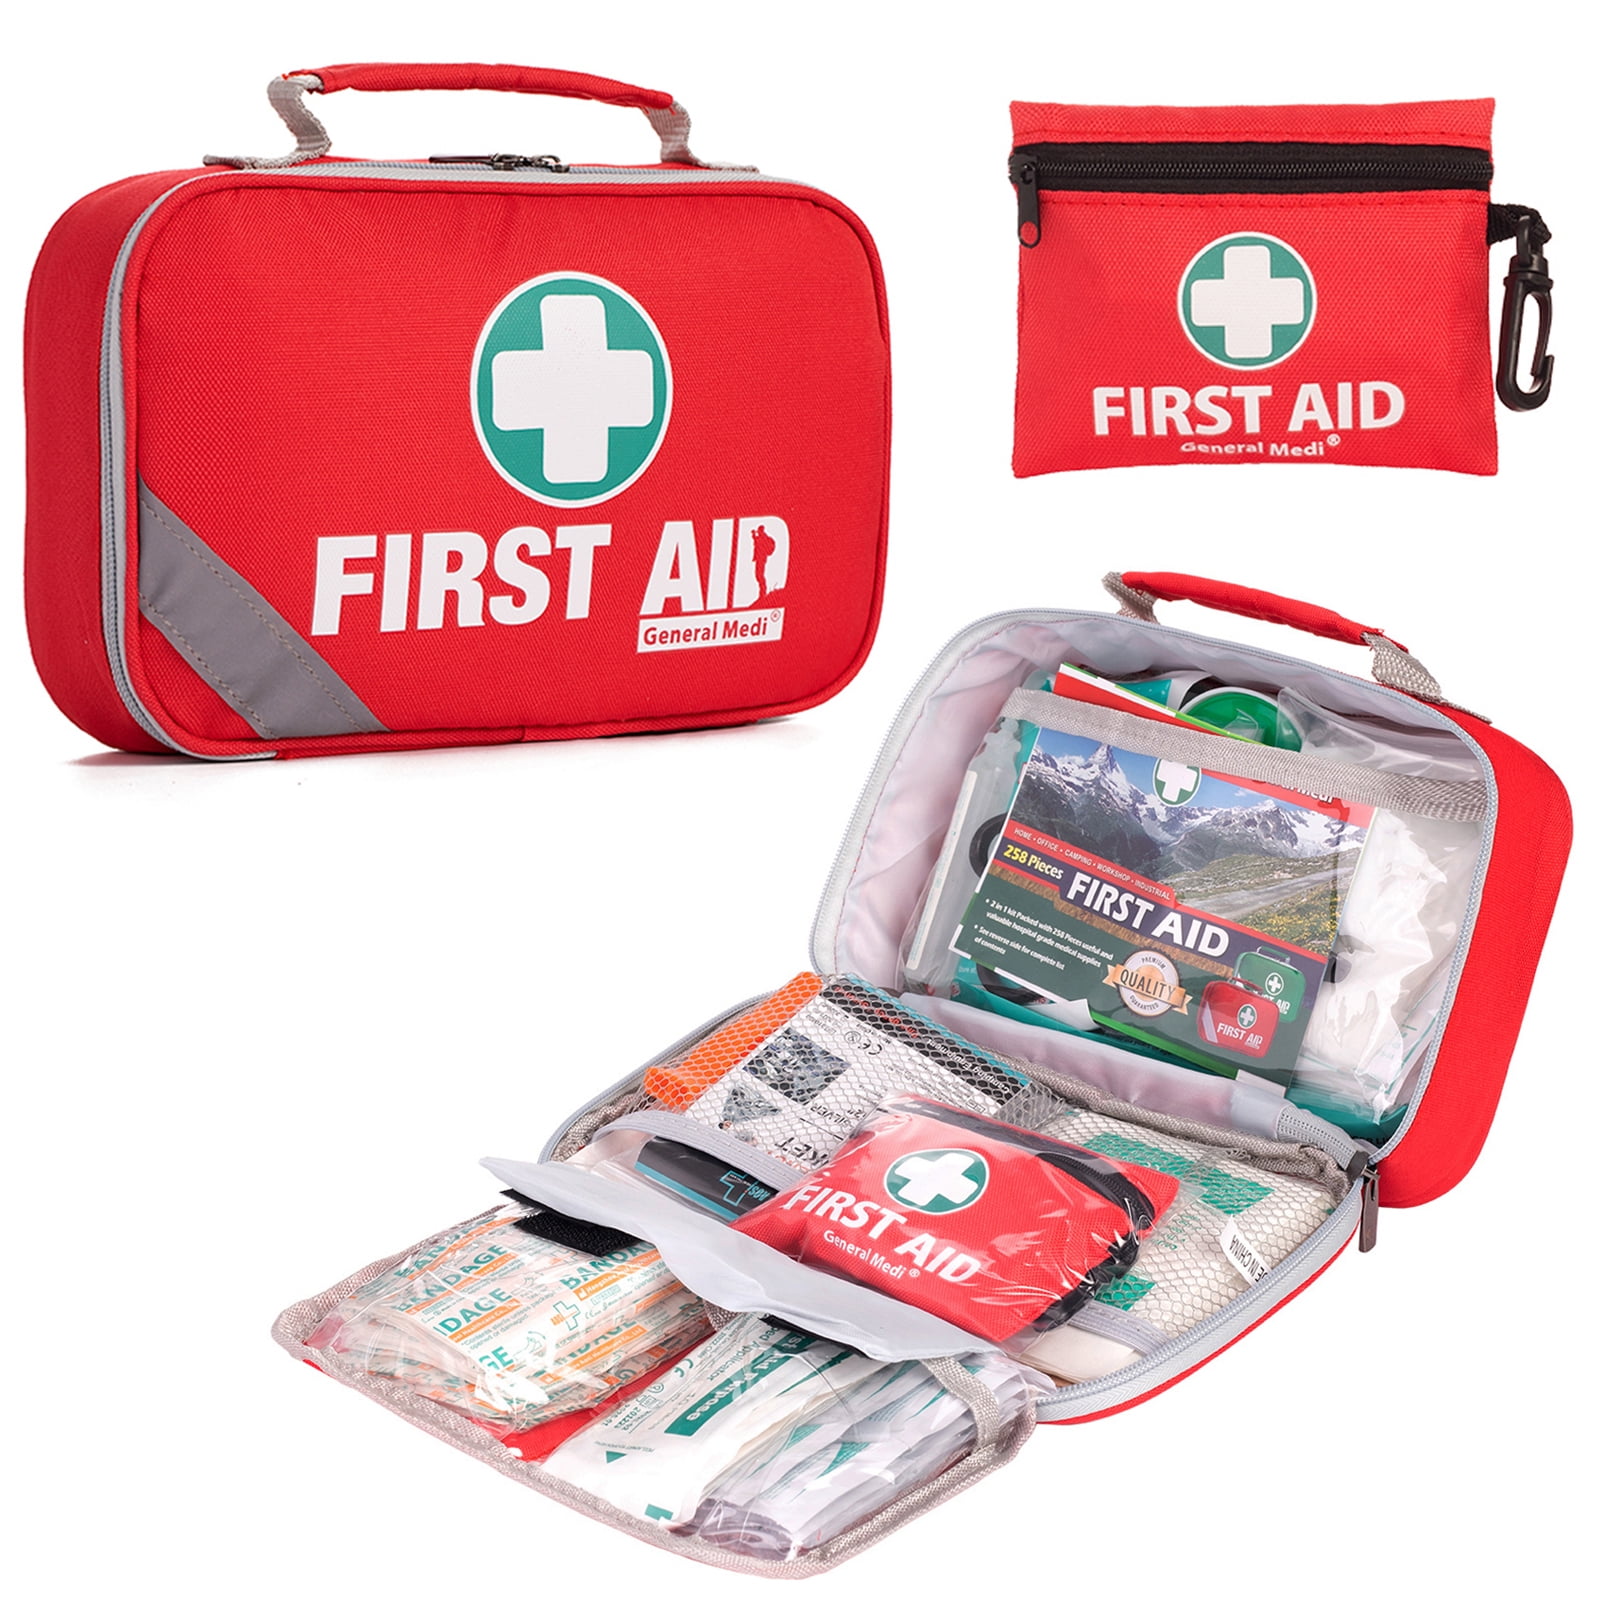 2-in-1 First Aid Kit (215 Piece) + Bonus 43 Piece Mini First Aid Kit  -Includes Eyewash, Ice(Cold) Pack, Moleskin Pad and Emergency Blanket for  Travel